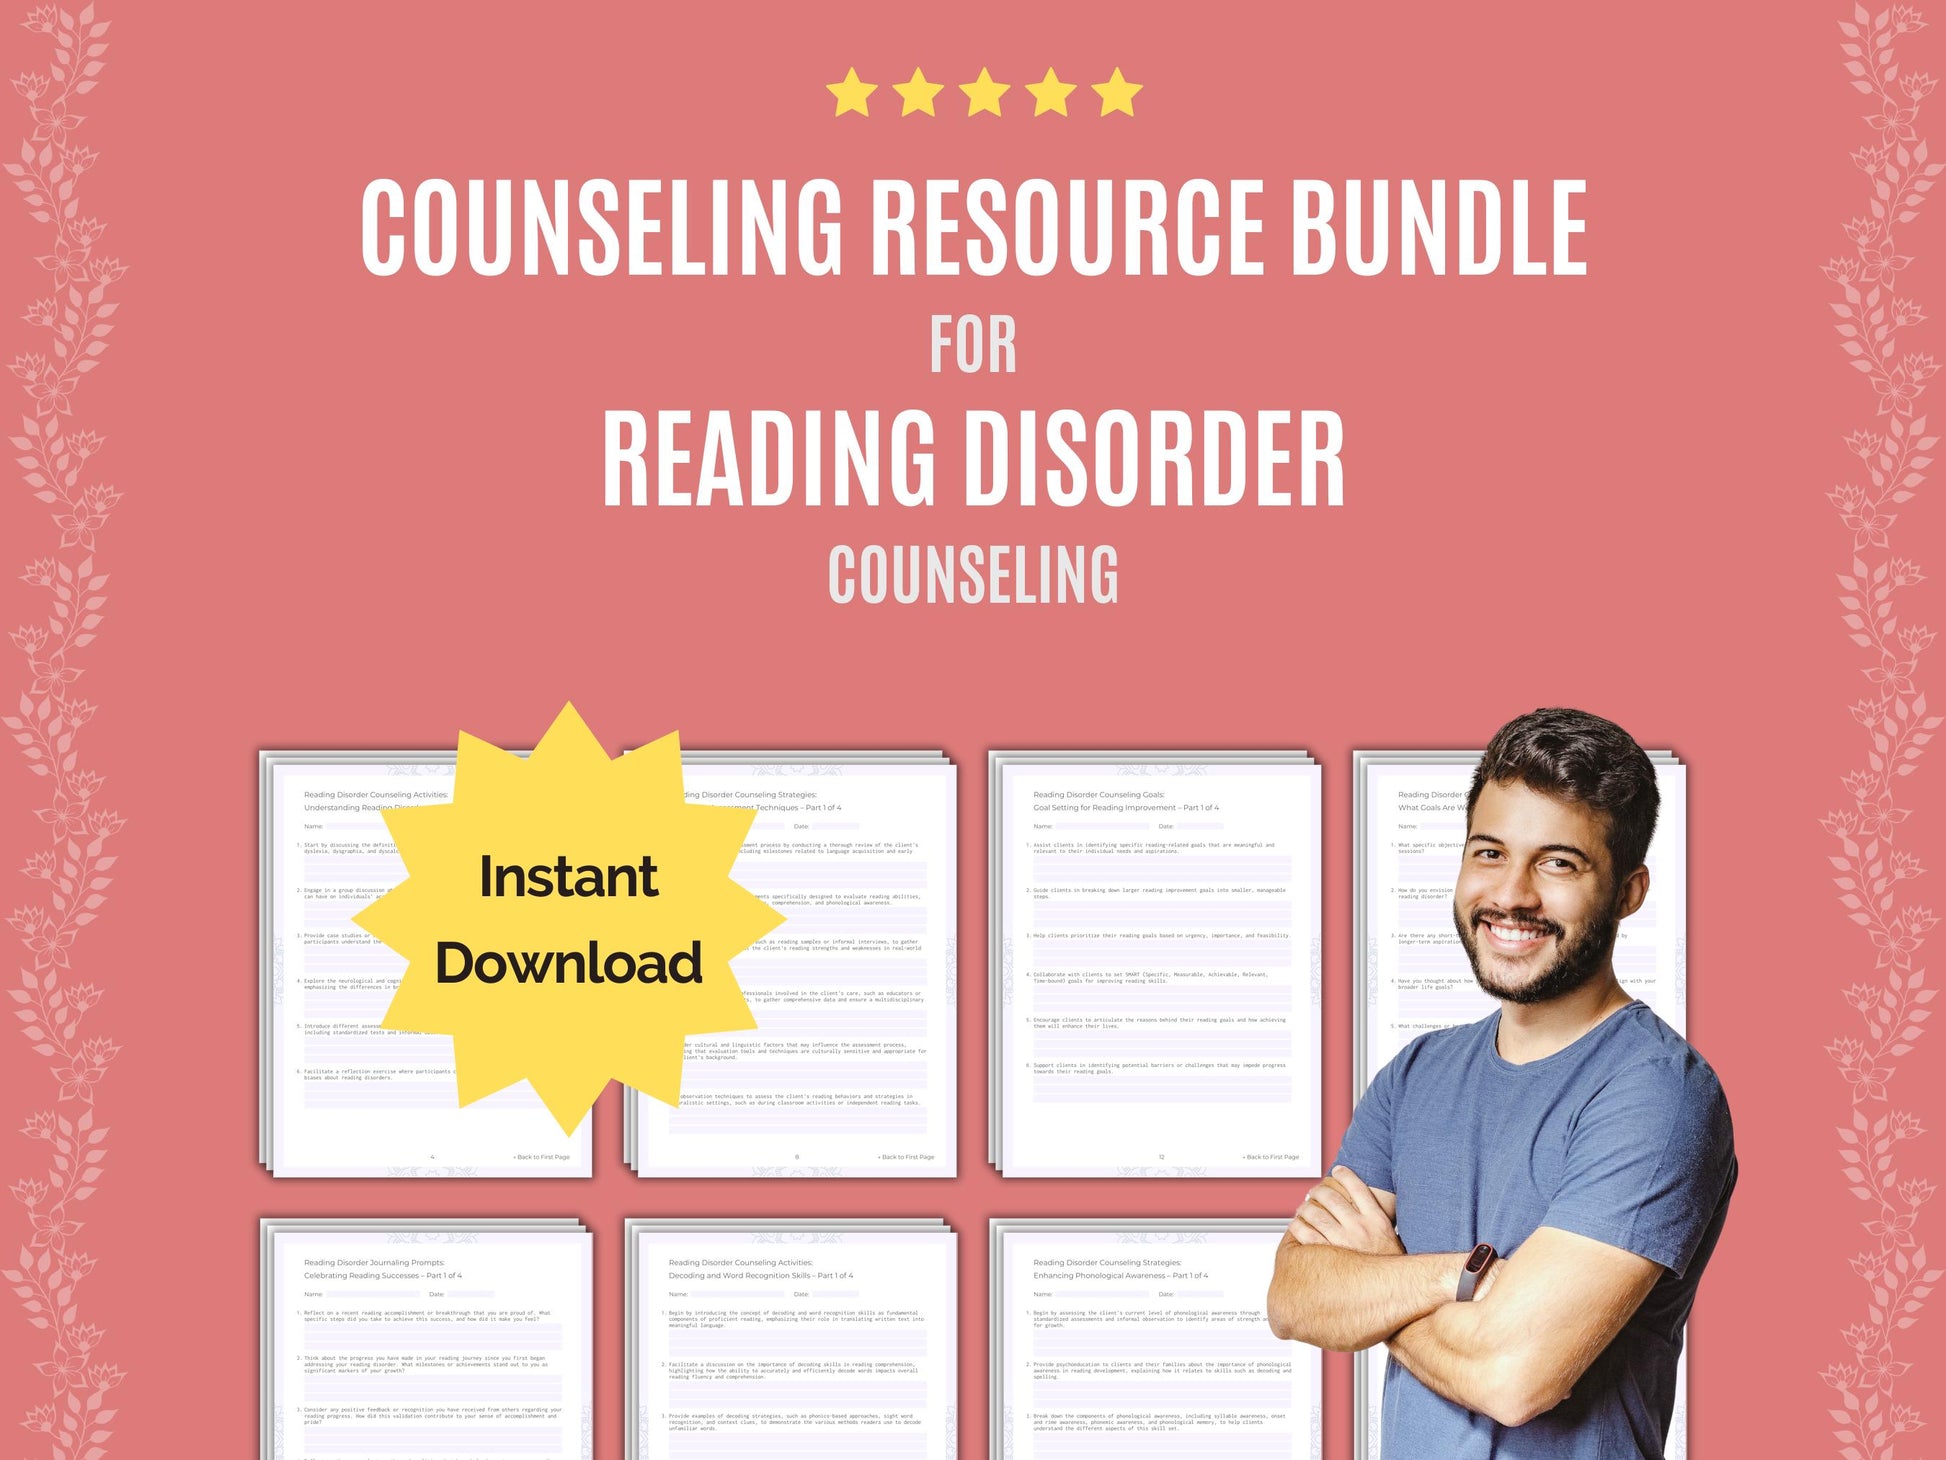 Reading Template, Reading Counseling, Reading Workbook, Reading Idea, Reading Resource, Disorder, Reading Bundle, Reading Therapy, Therapist, Dyslexia, Counselor, Mental Health, Reading Worksheet